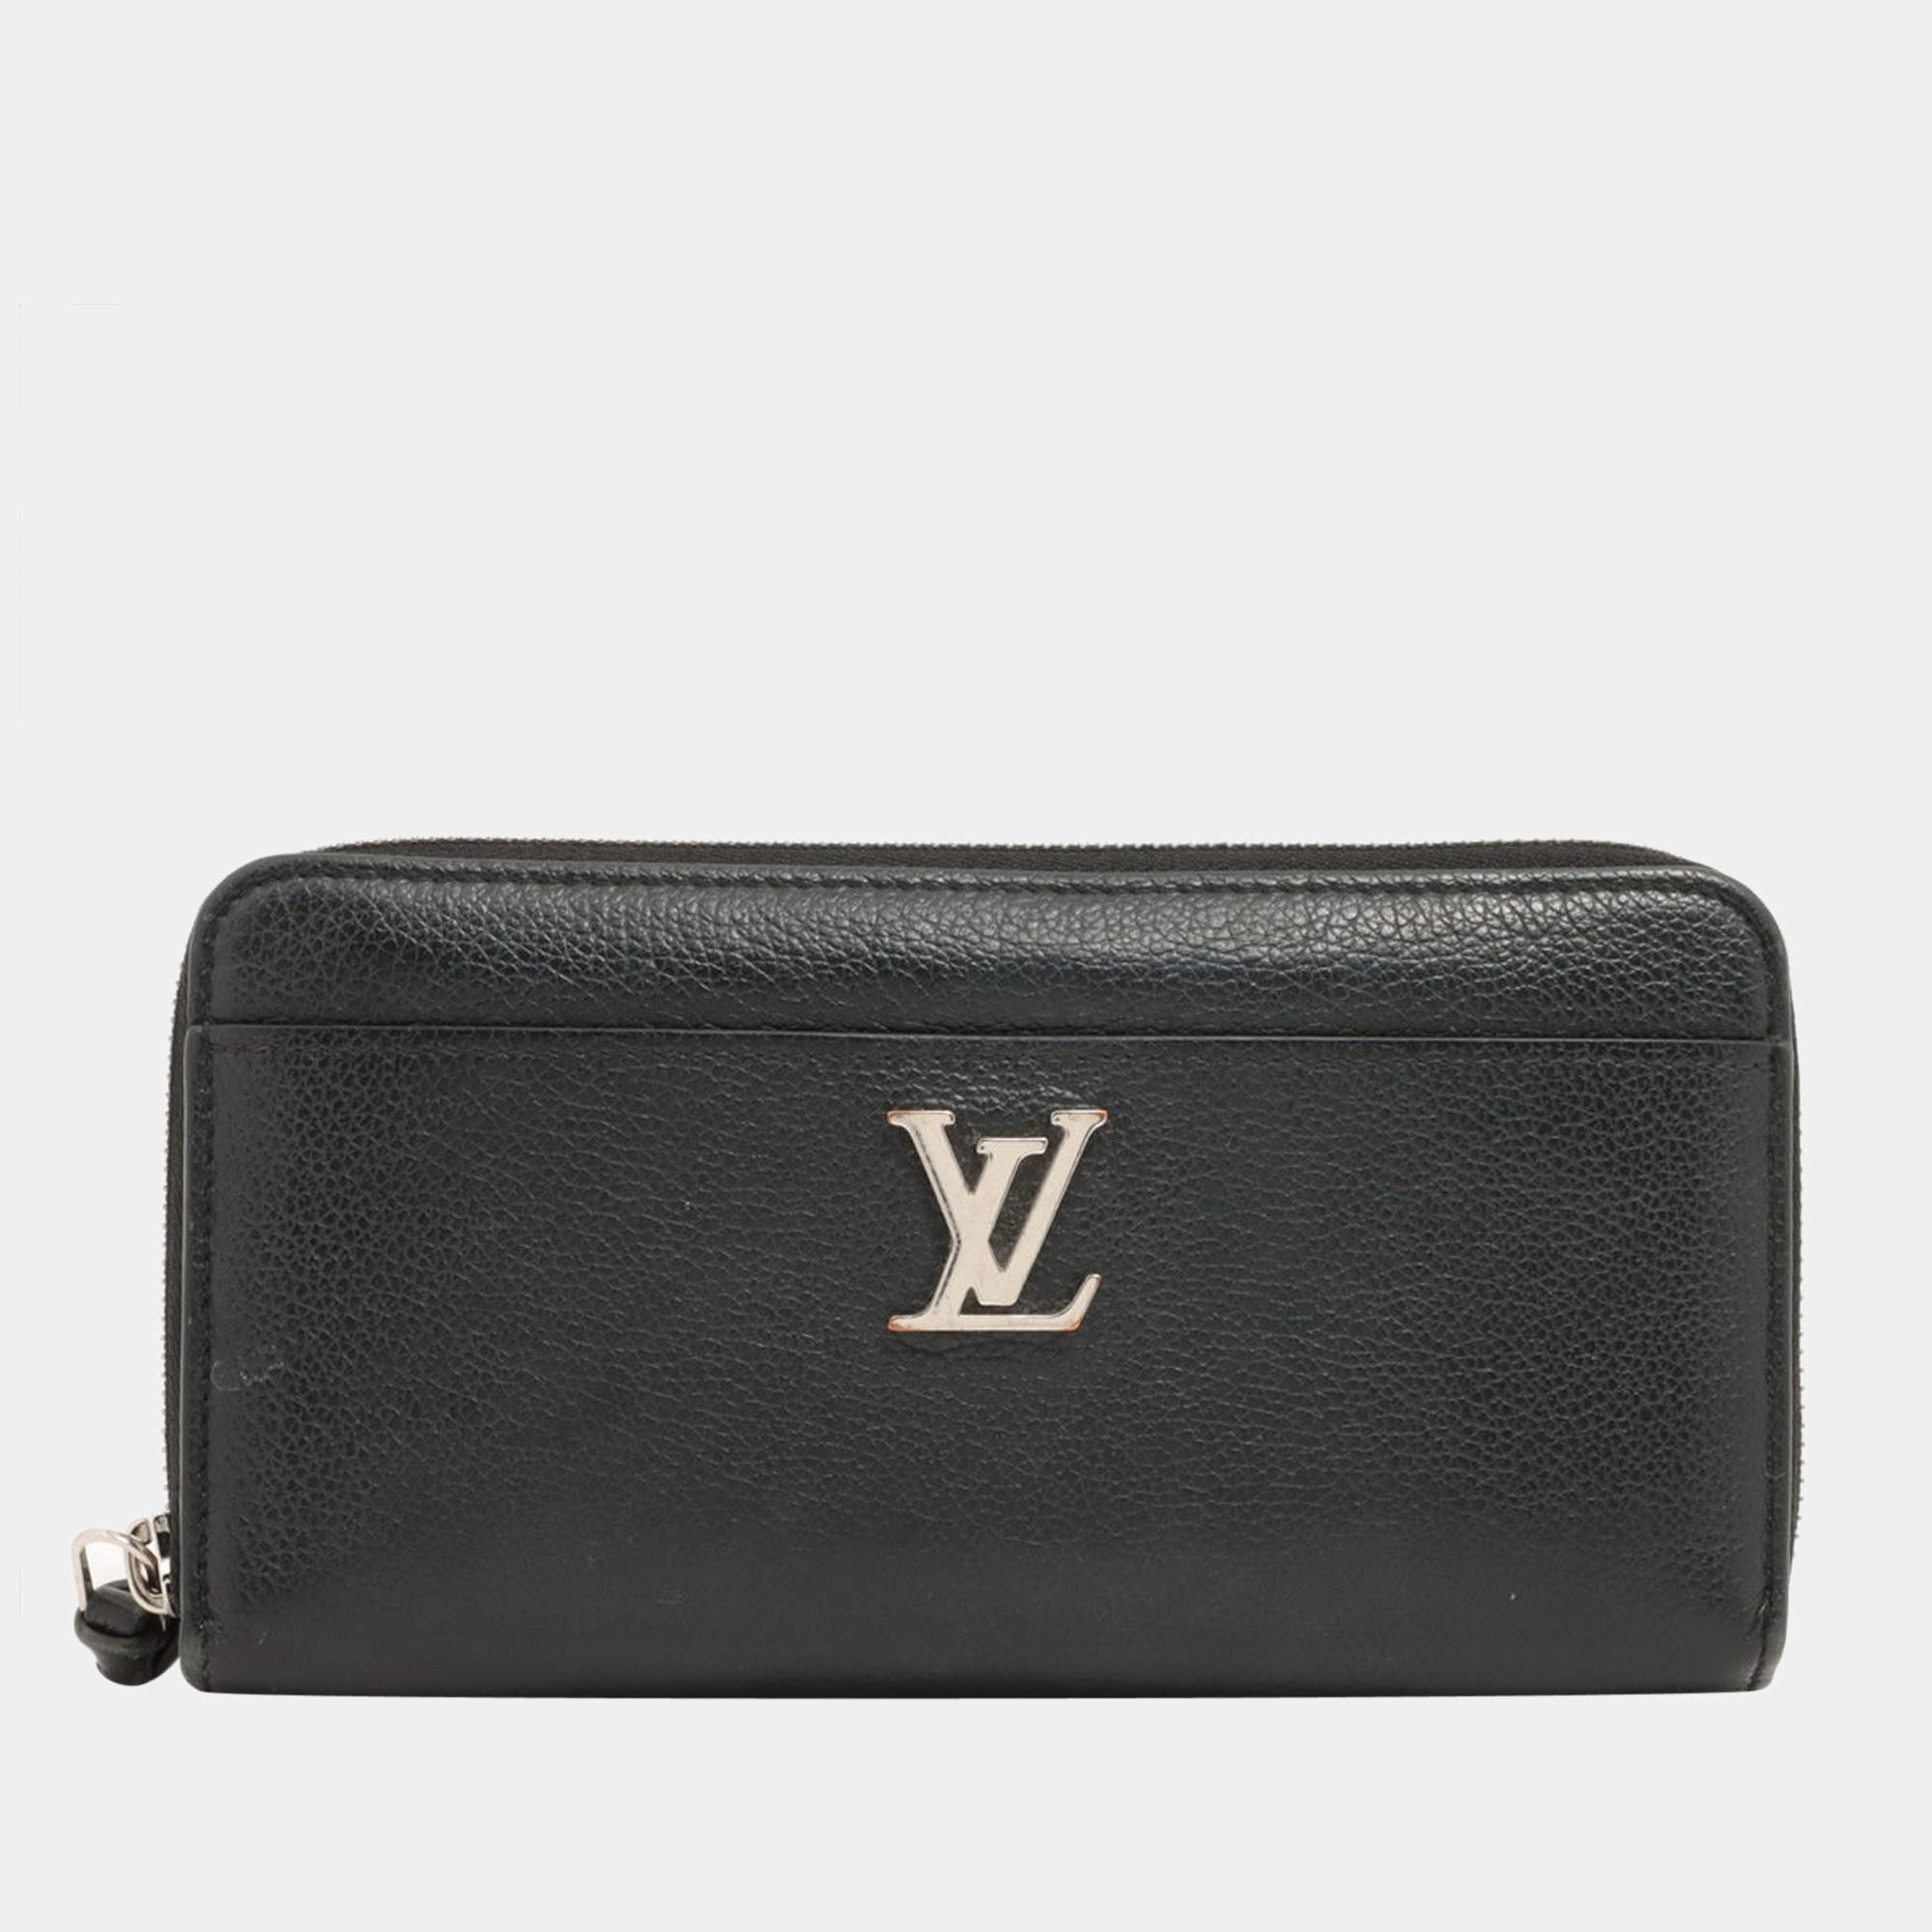 Shop preloved Louis Vuitton with me!